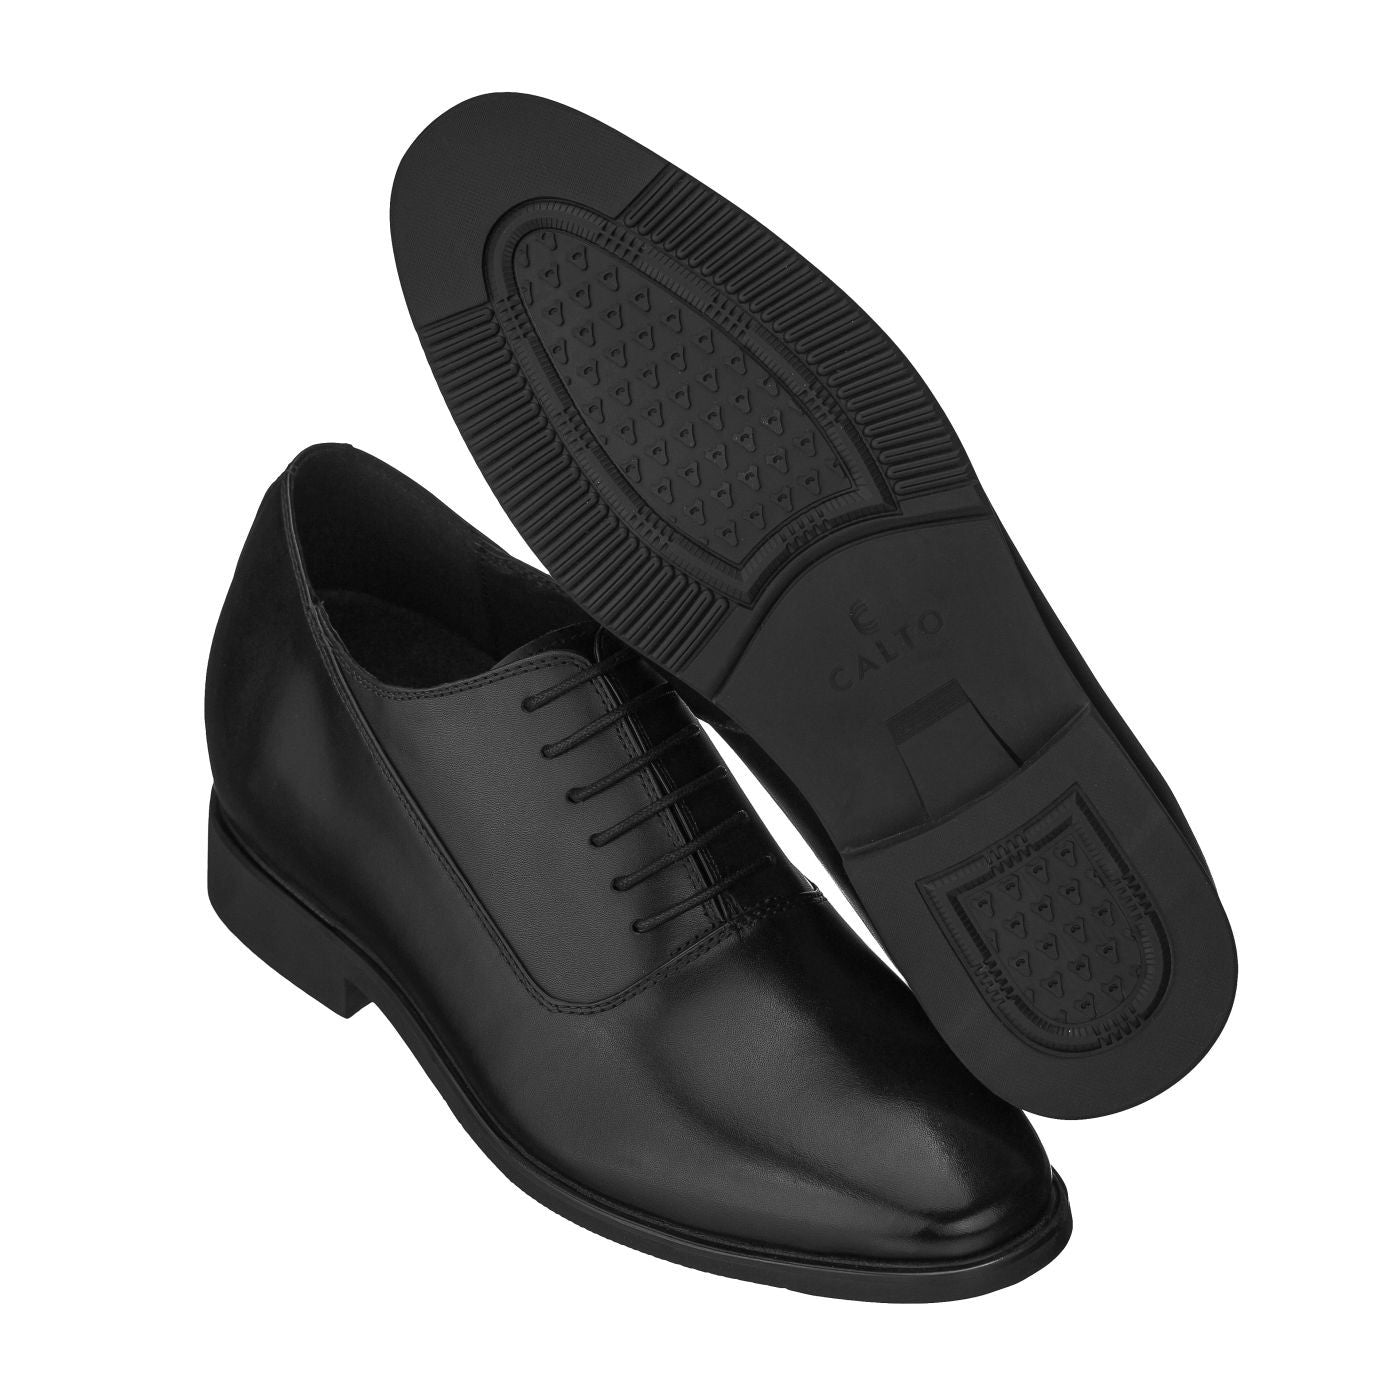 Elevator shoes height increase CALTO - G8082 - 3 Inches Taller (Black)